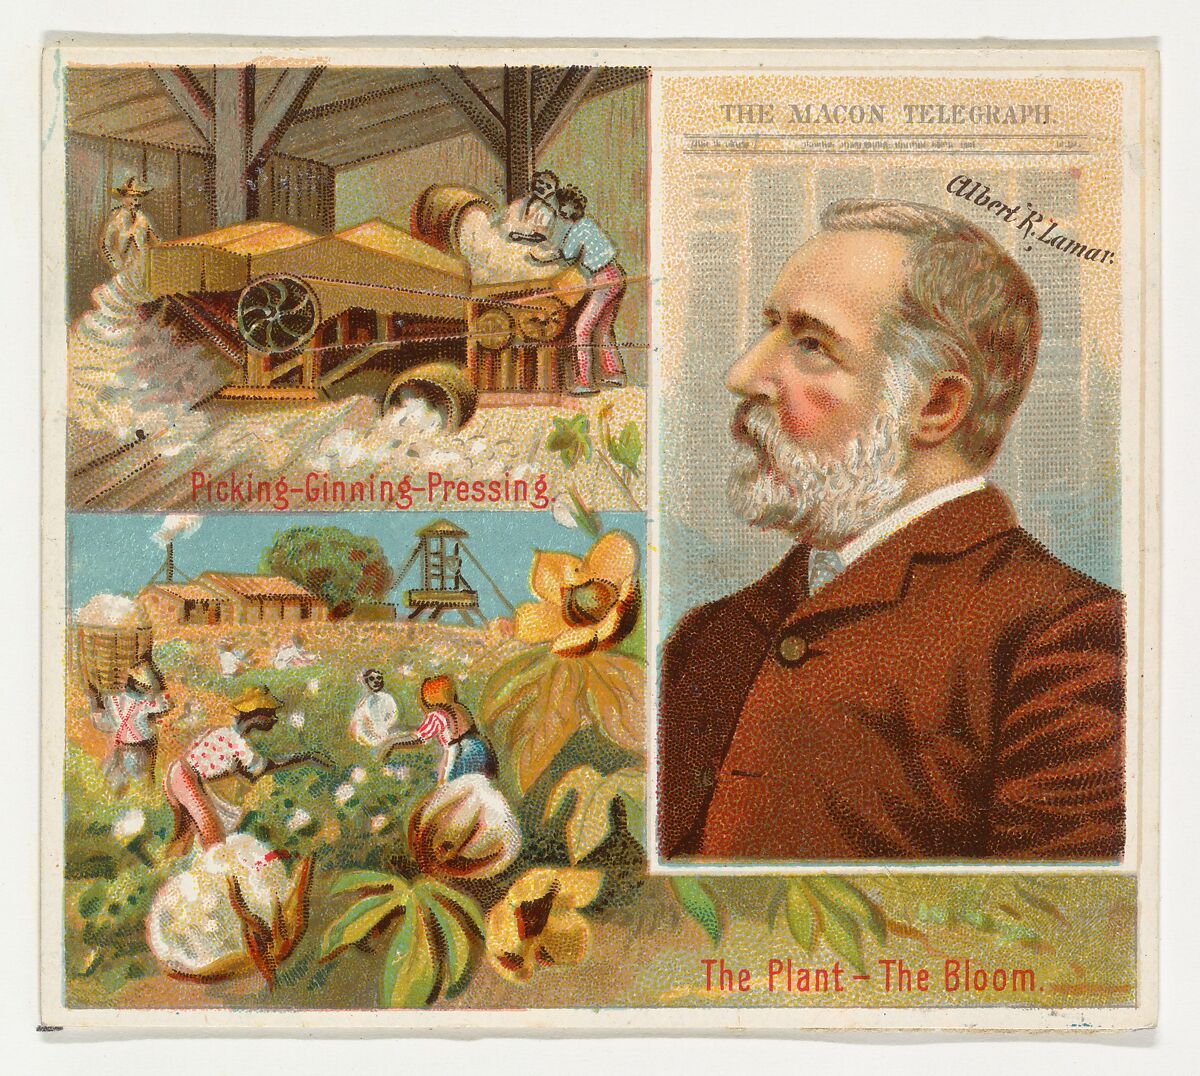 Albert R. Lamar, The Macon Telegraph, from the American Editors series (N35) for Allen & Ginter Cigarettes, Issued by Allen &amp; Ginter (American, Richmond, Virginia), Commercial color lithograph 